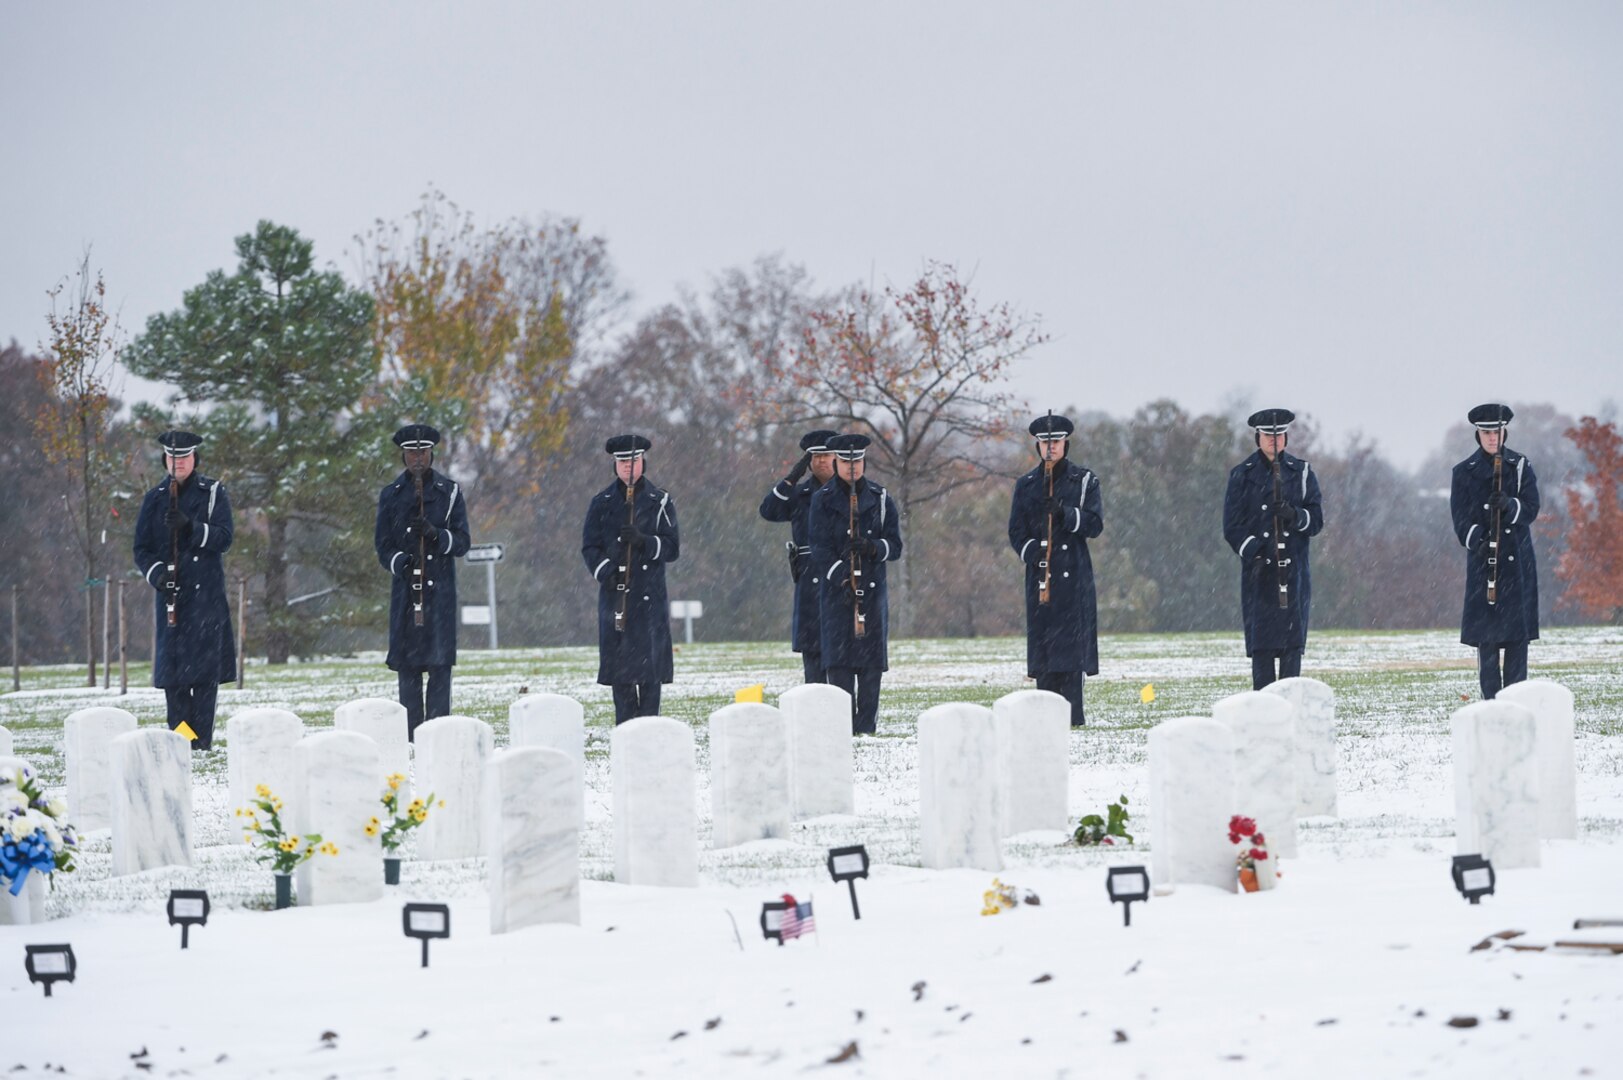 The U.S Air Force firing party perform a rifle salute in honor of the late Chief Master Sgt. Therese Henrion during an interment at Arlington National Cemetery, Nov. 15, 2018.